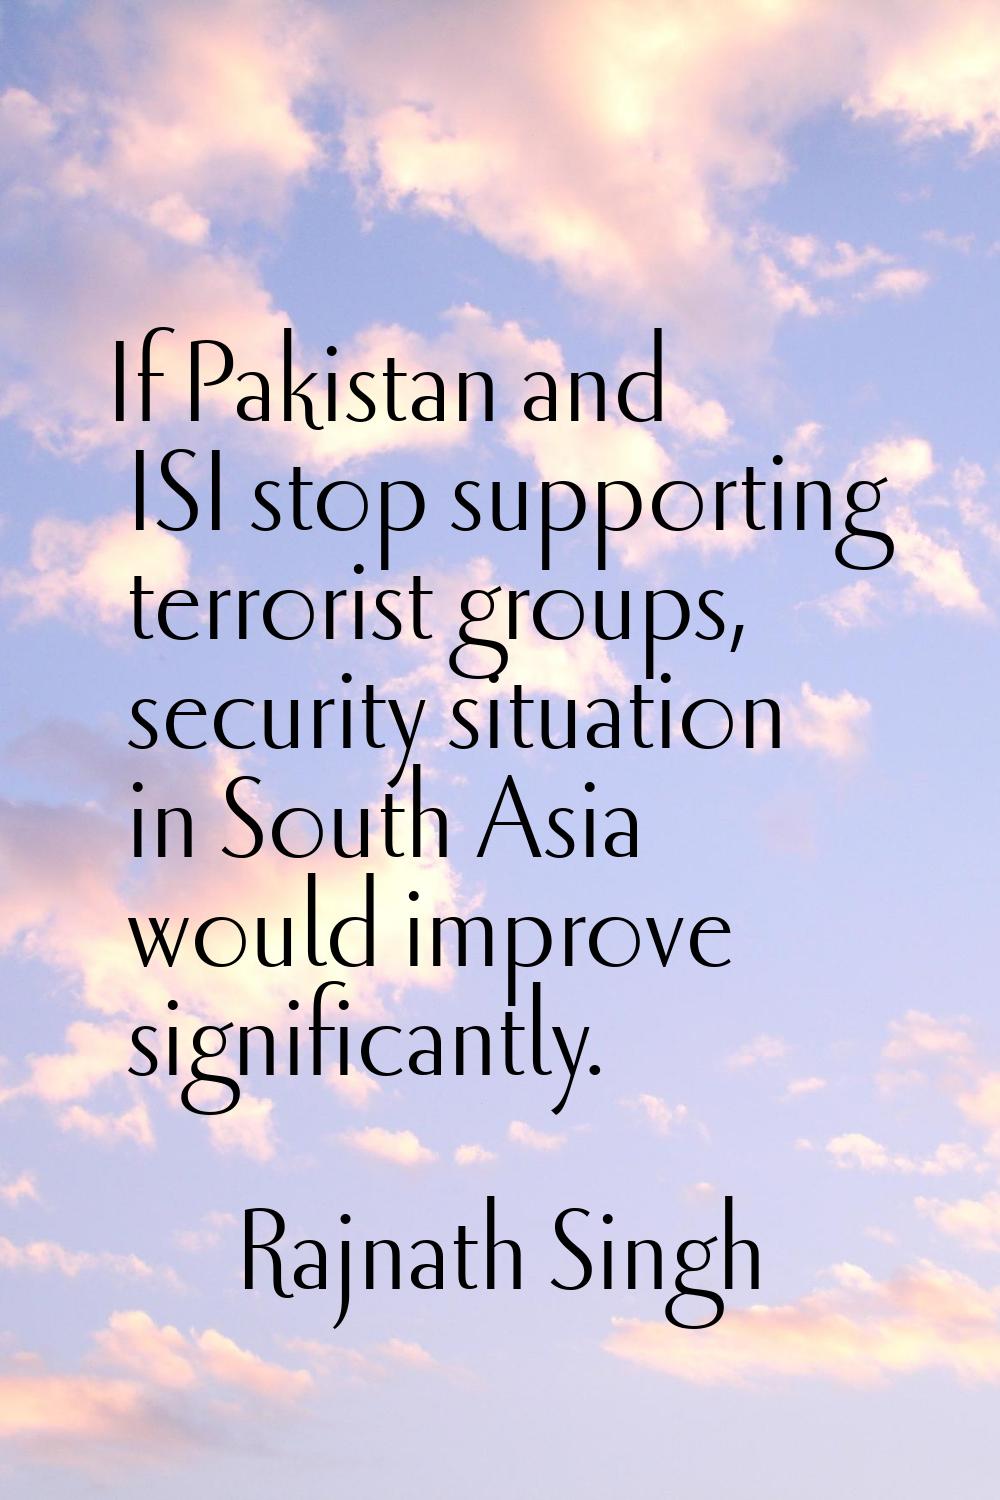 If Pakistan and ISI stop supporting terrorist groups, security situation in South Asia would improv